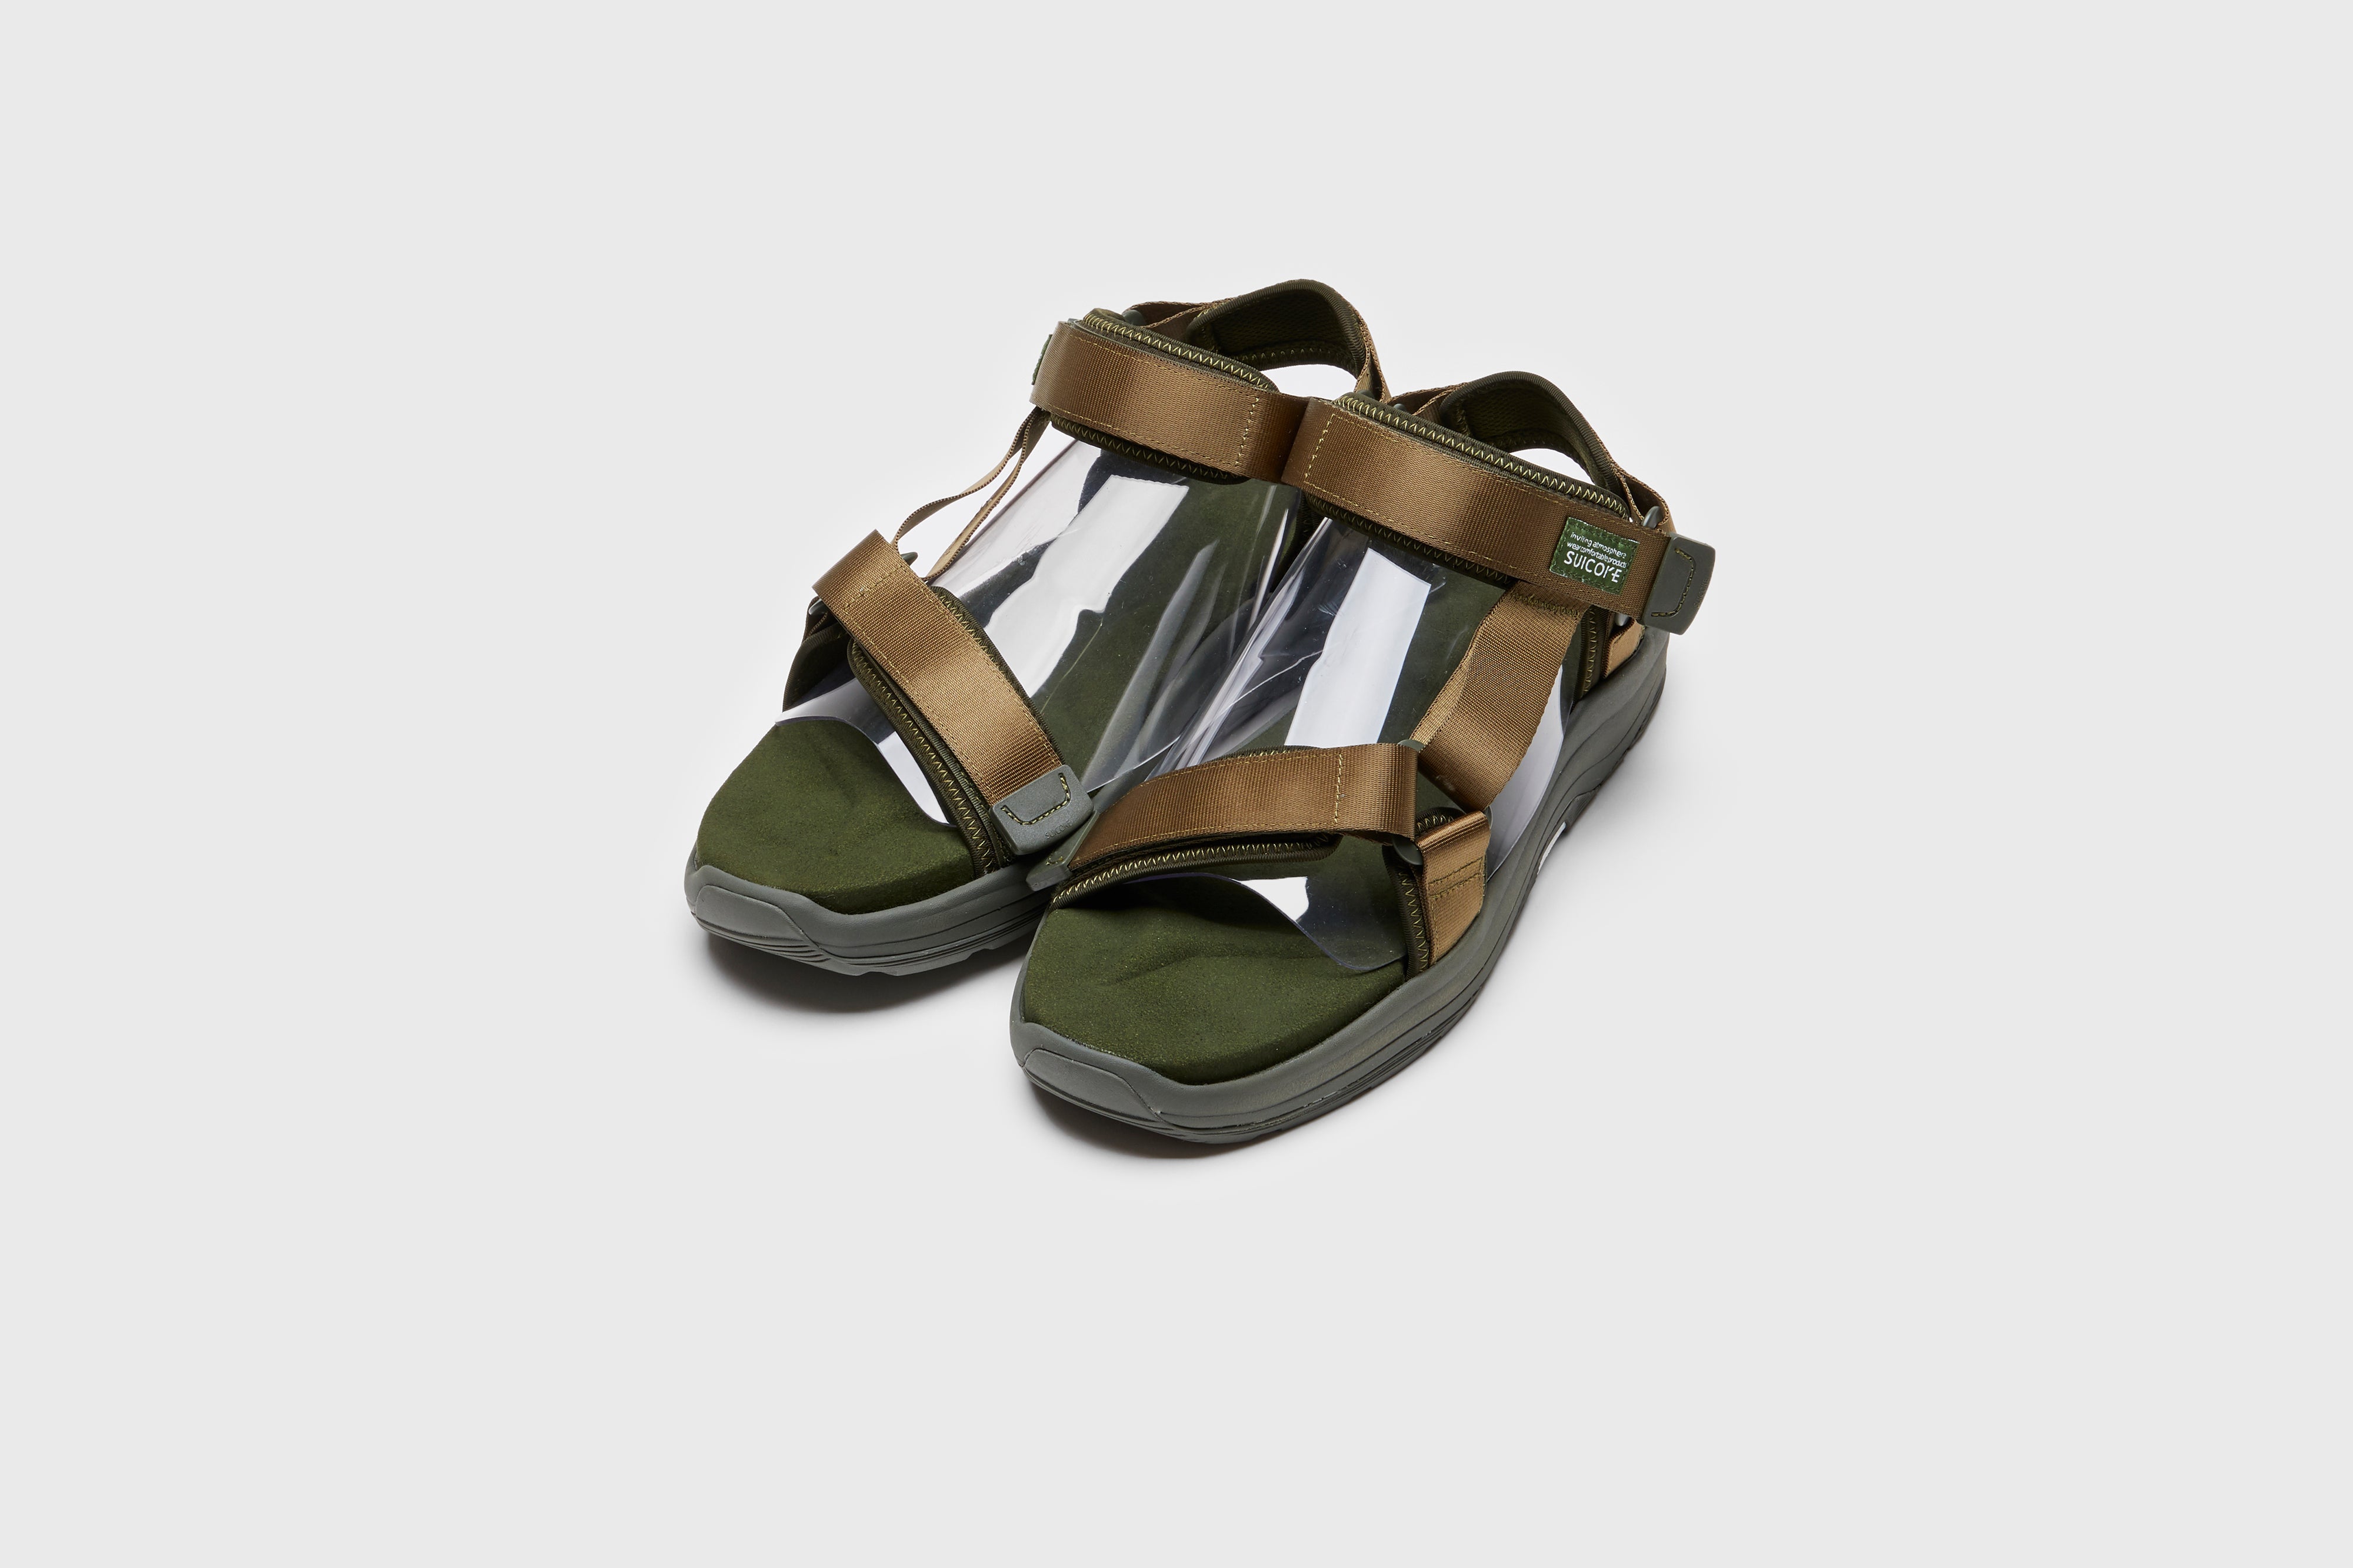 SUICOKE DEPA-Run slides with olive nylon upper, olive midsole and sole, strap and logo patch. From Spring/Summer 2023 collection on eightywingold Web Store, an official partner of SUICOKE. OG-333 OLIVE